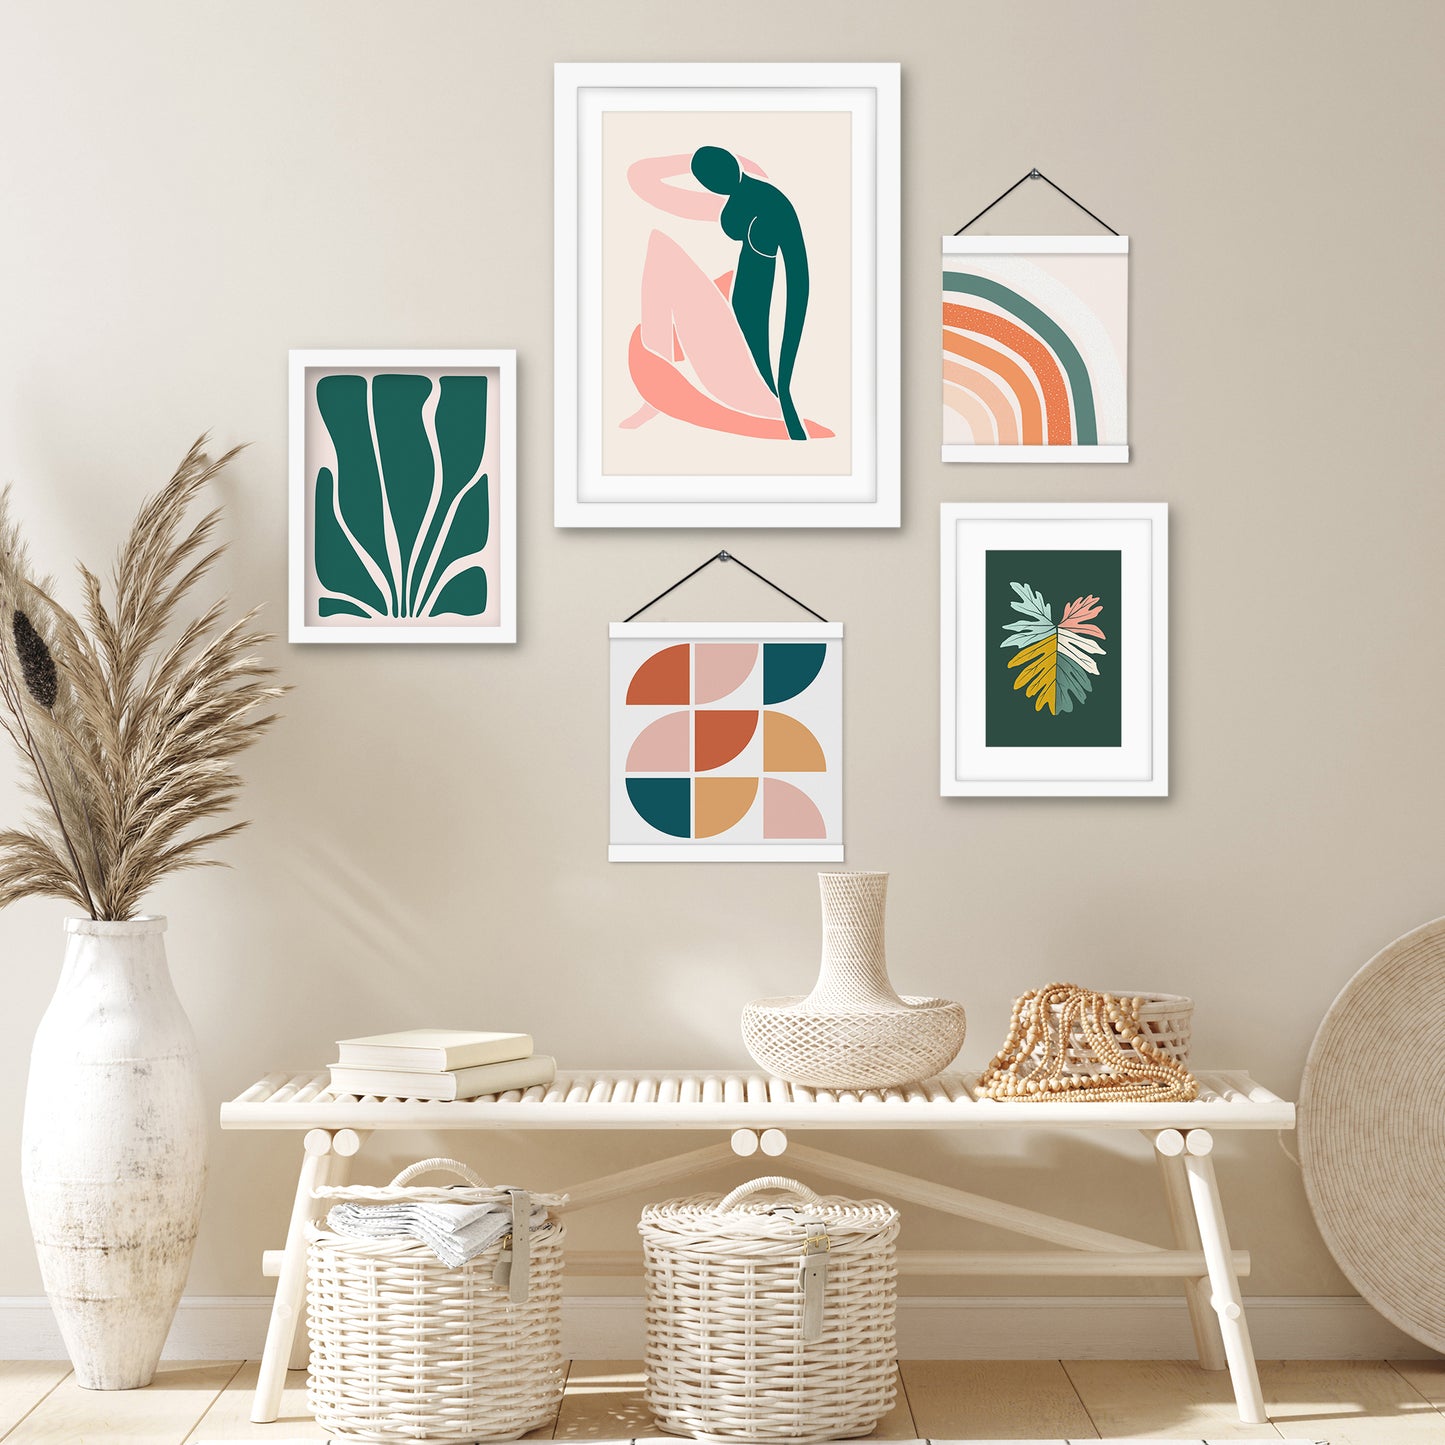 Pink Green Abstract Woman Shapes - Framed Multimedia Gallery Art Set